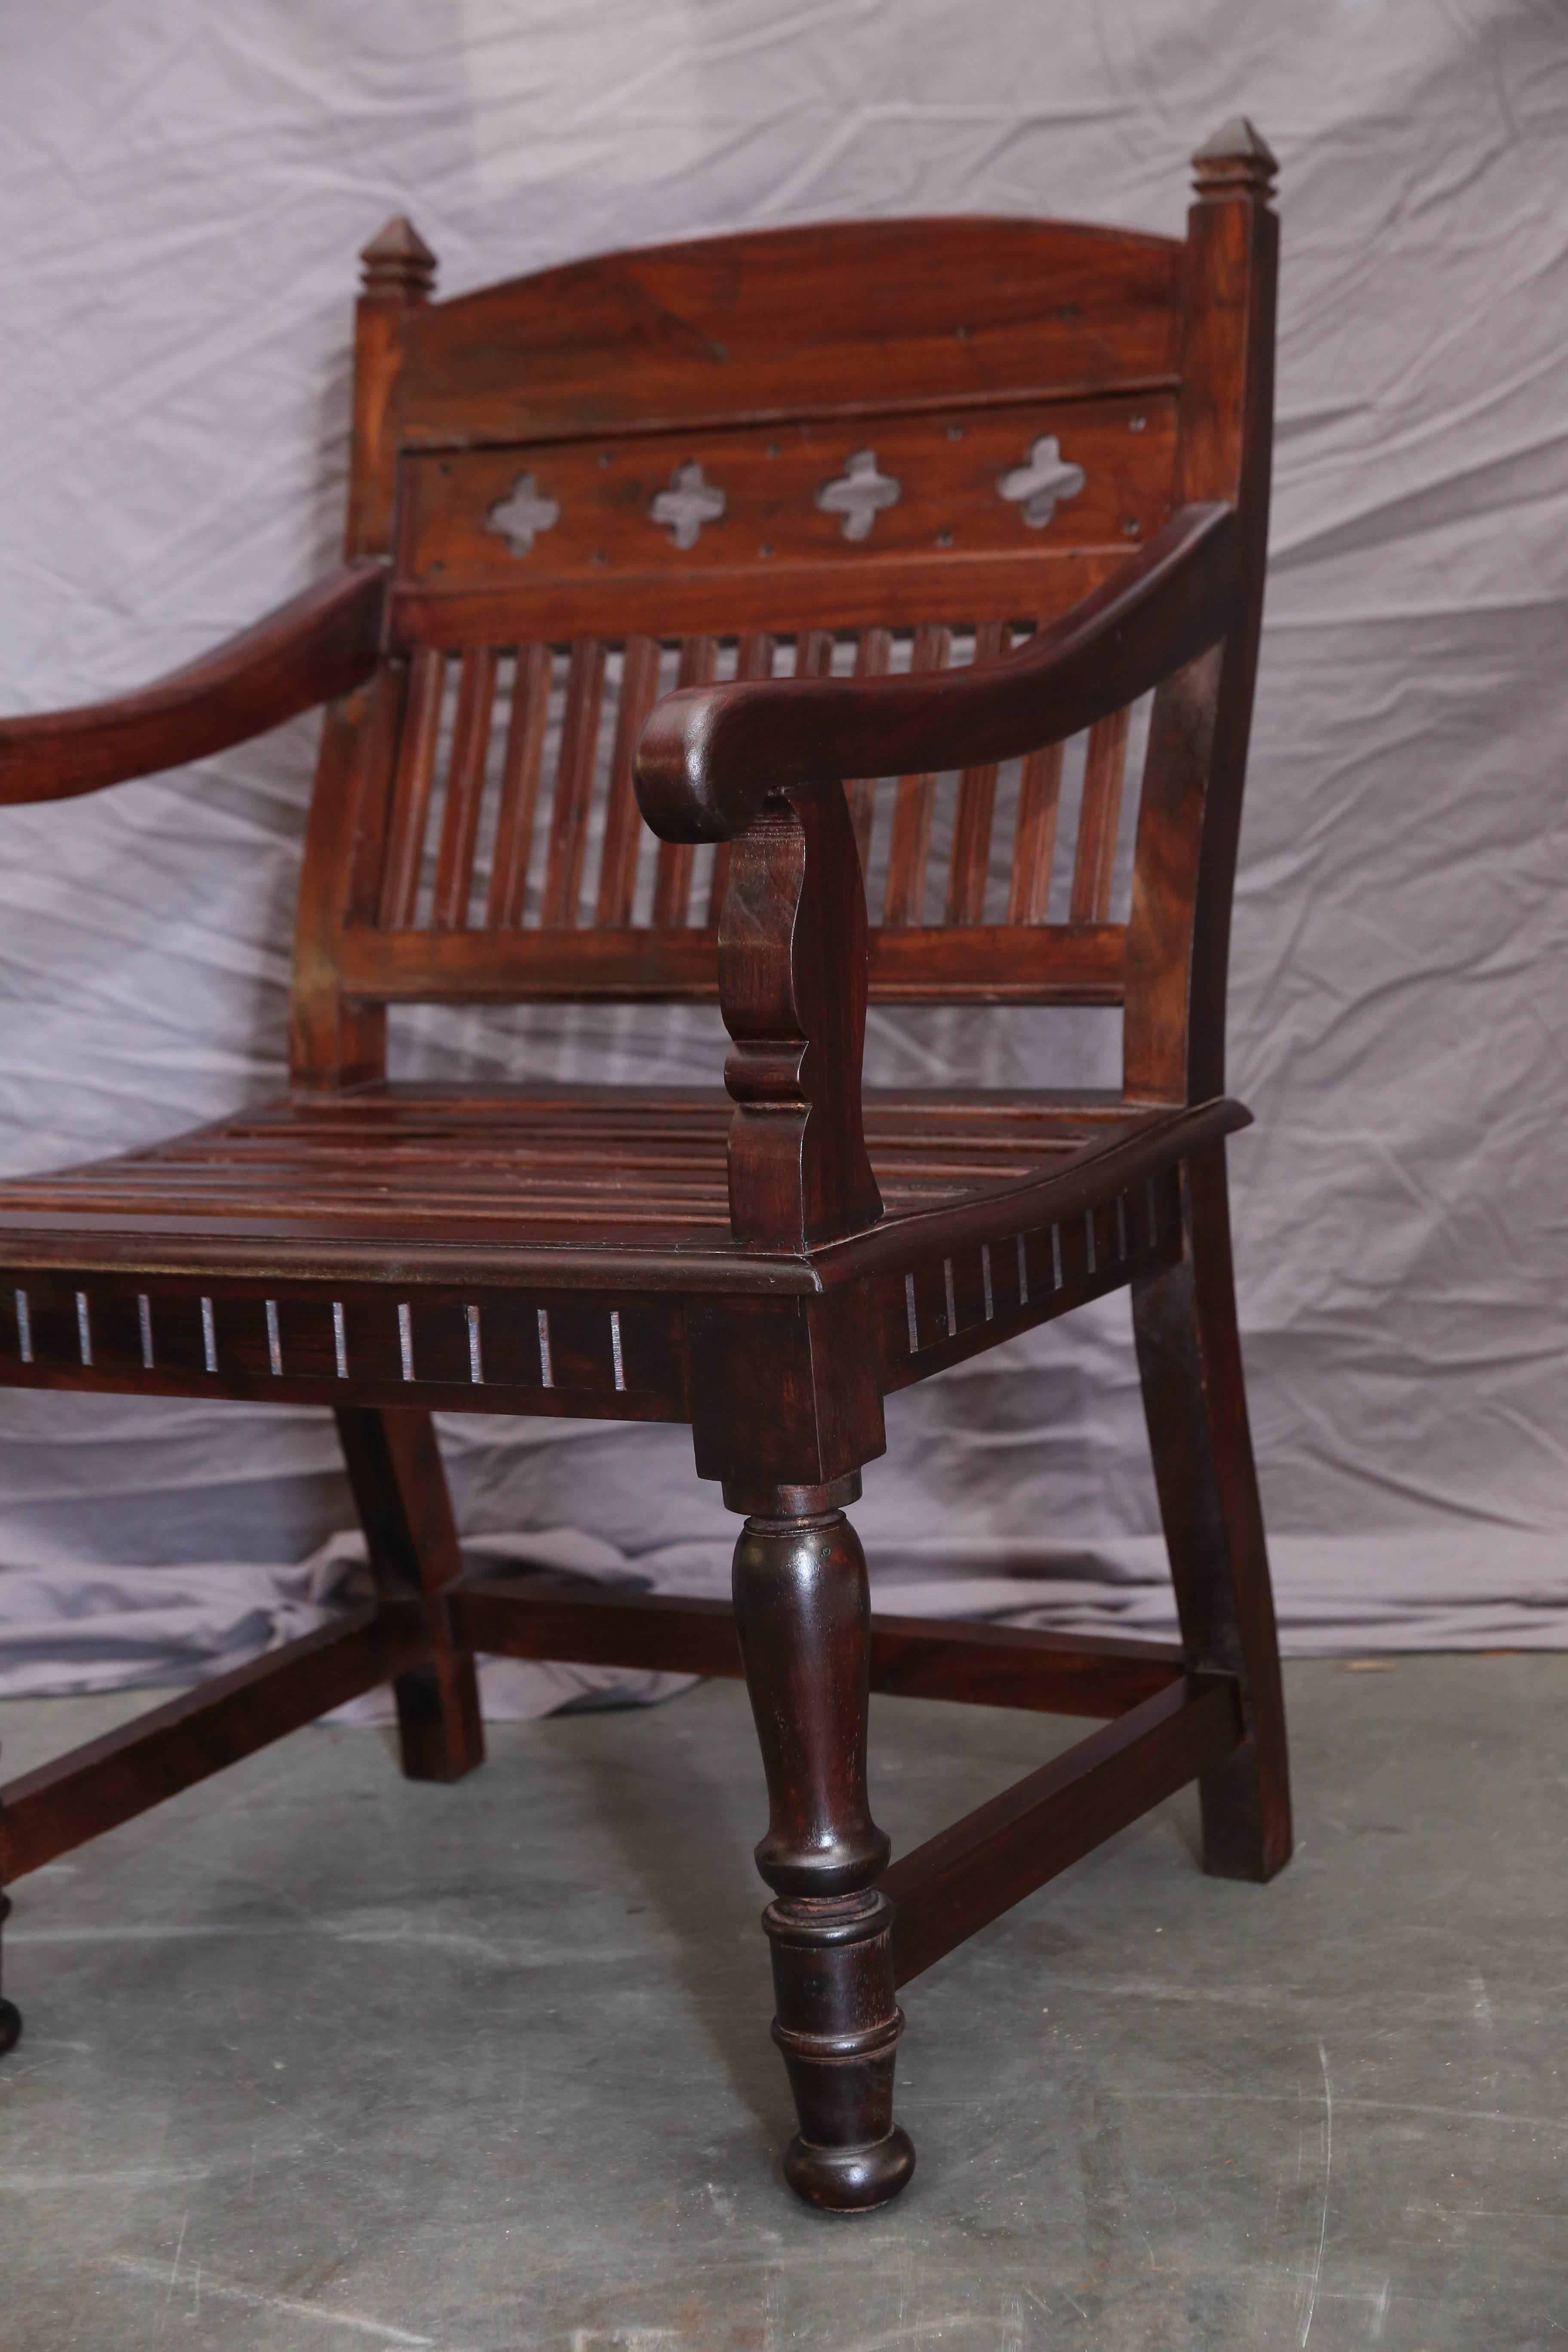 These two teak wood chairs designed for comfort come from a west coast monastery. These sofa like chairs were used in the large waiting rooms for dignitaries who come to visit the bishop. The rich wood patina combined with old world carpentry will